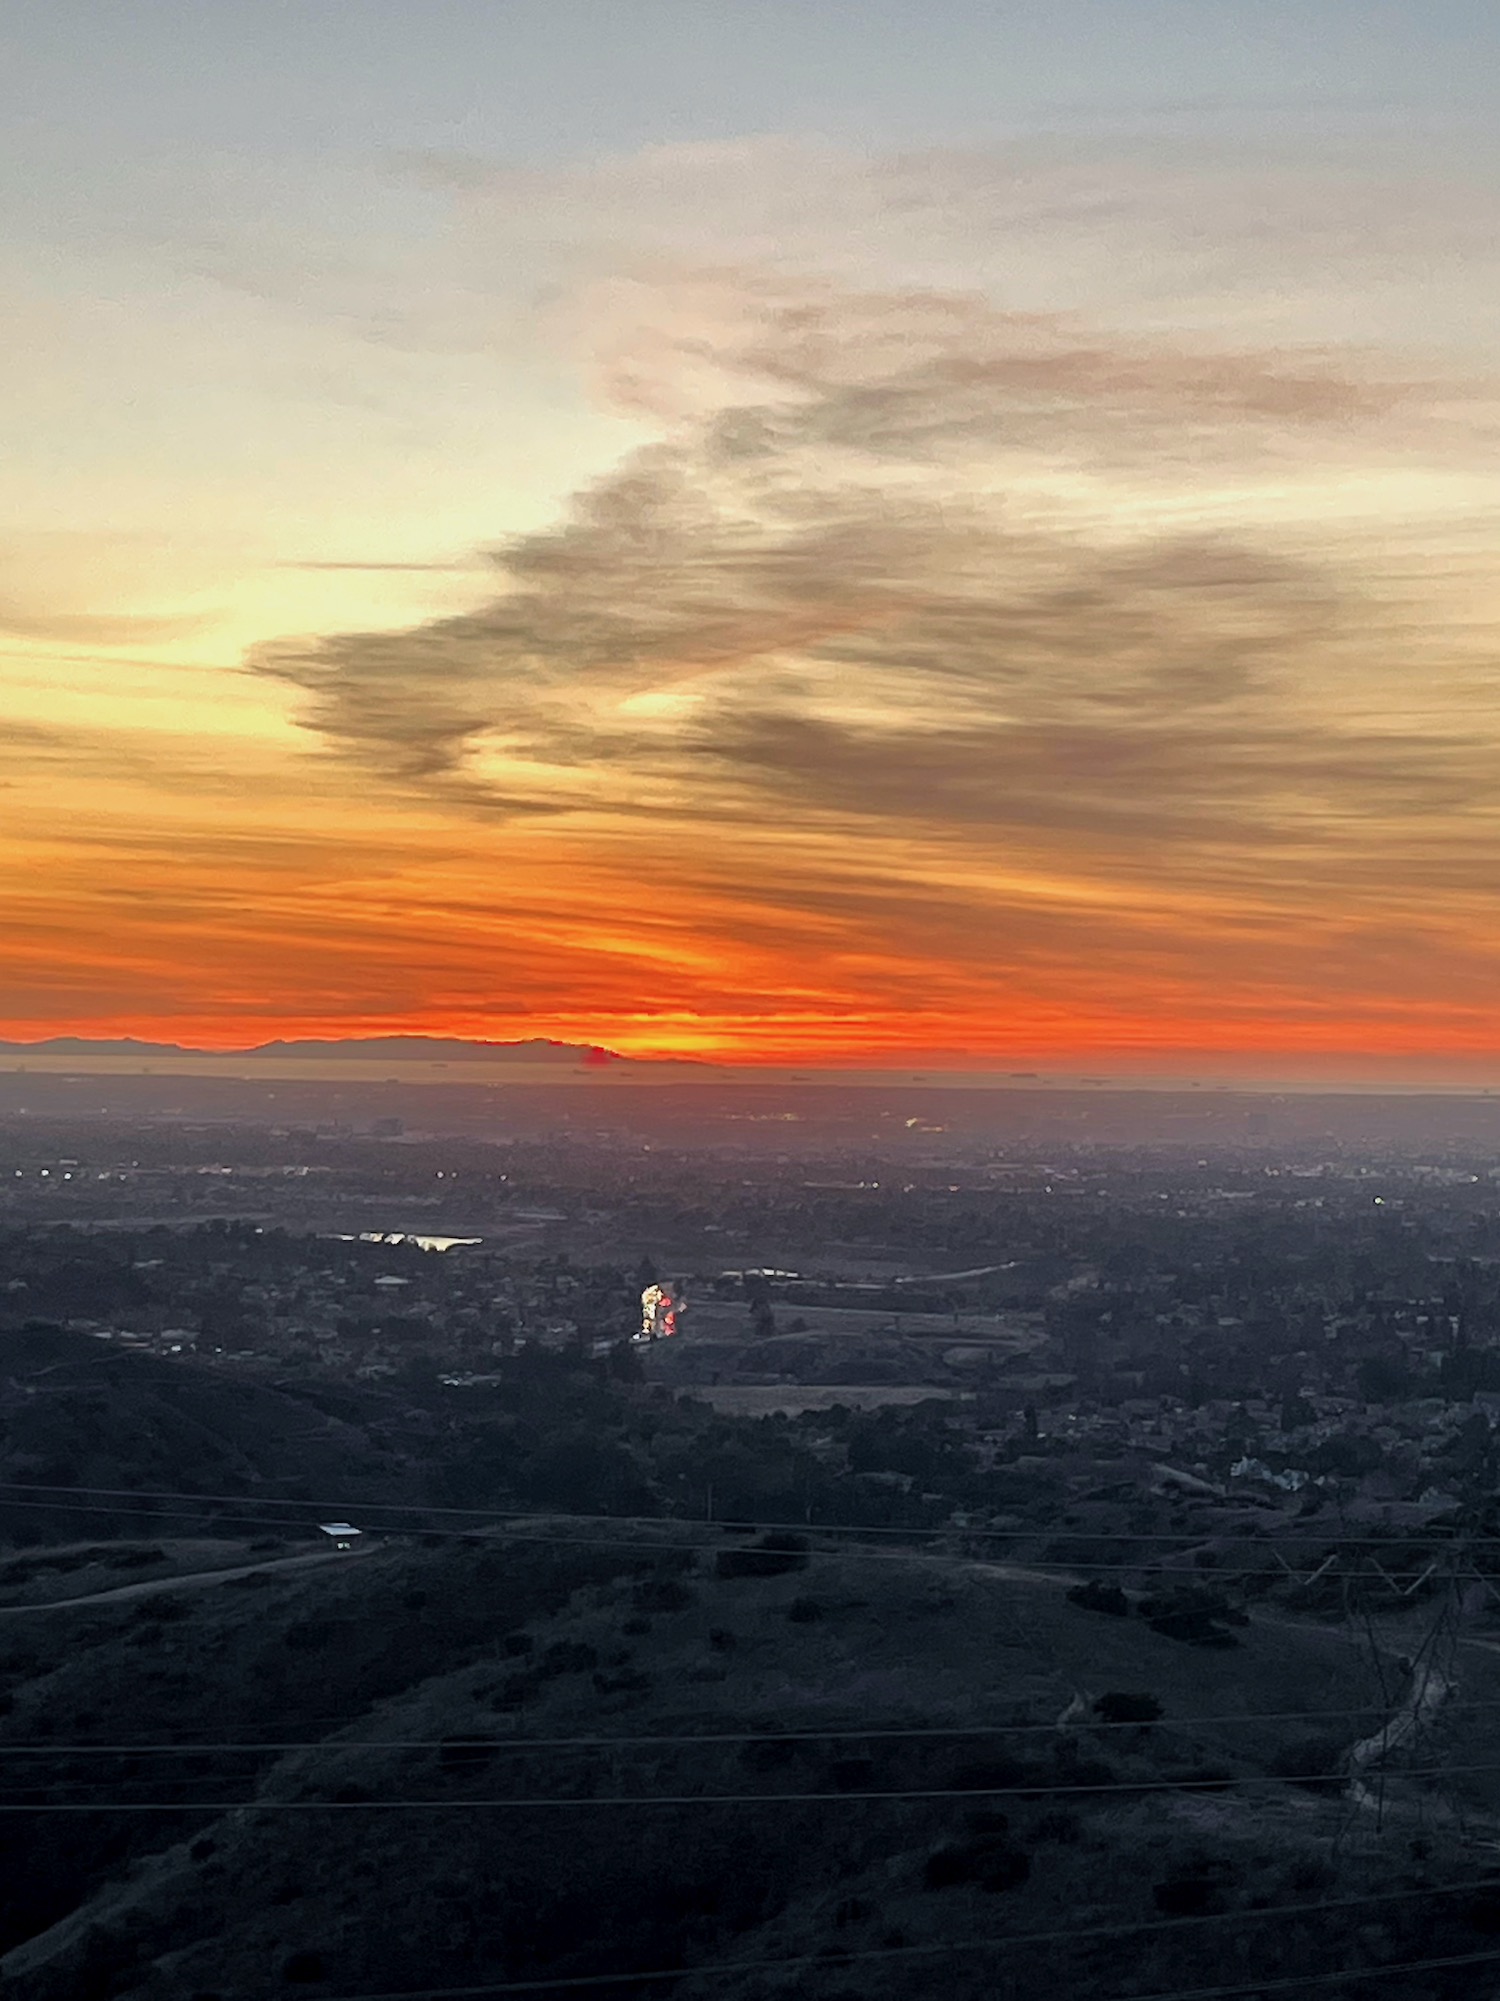 Sunset over pacific ocean - robbers roost vantage point - anaheim hills -20